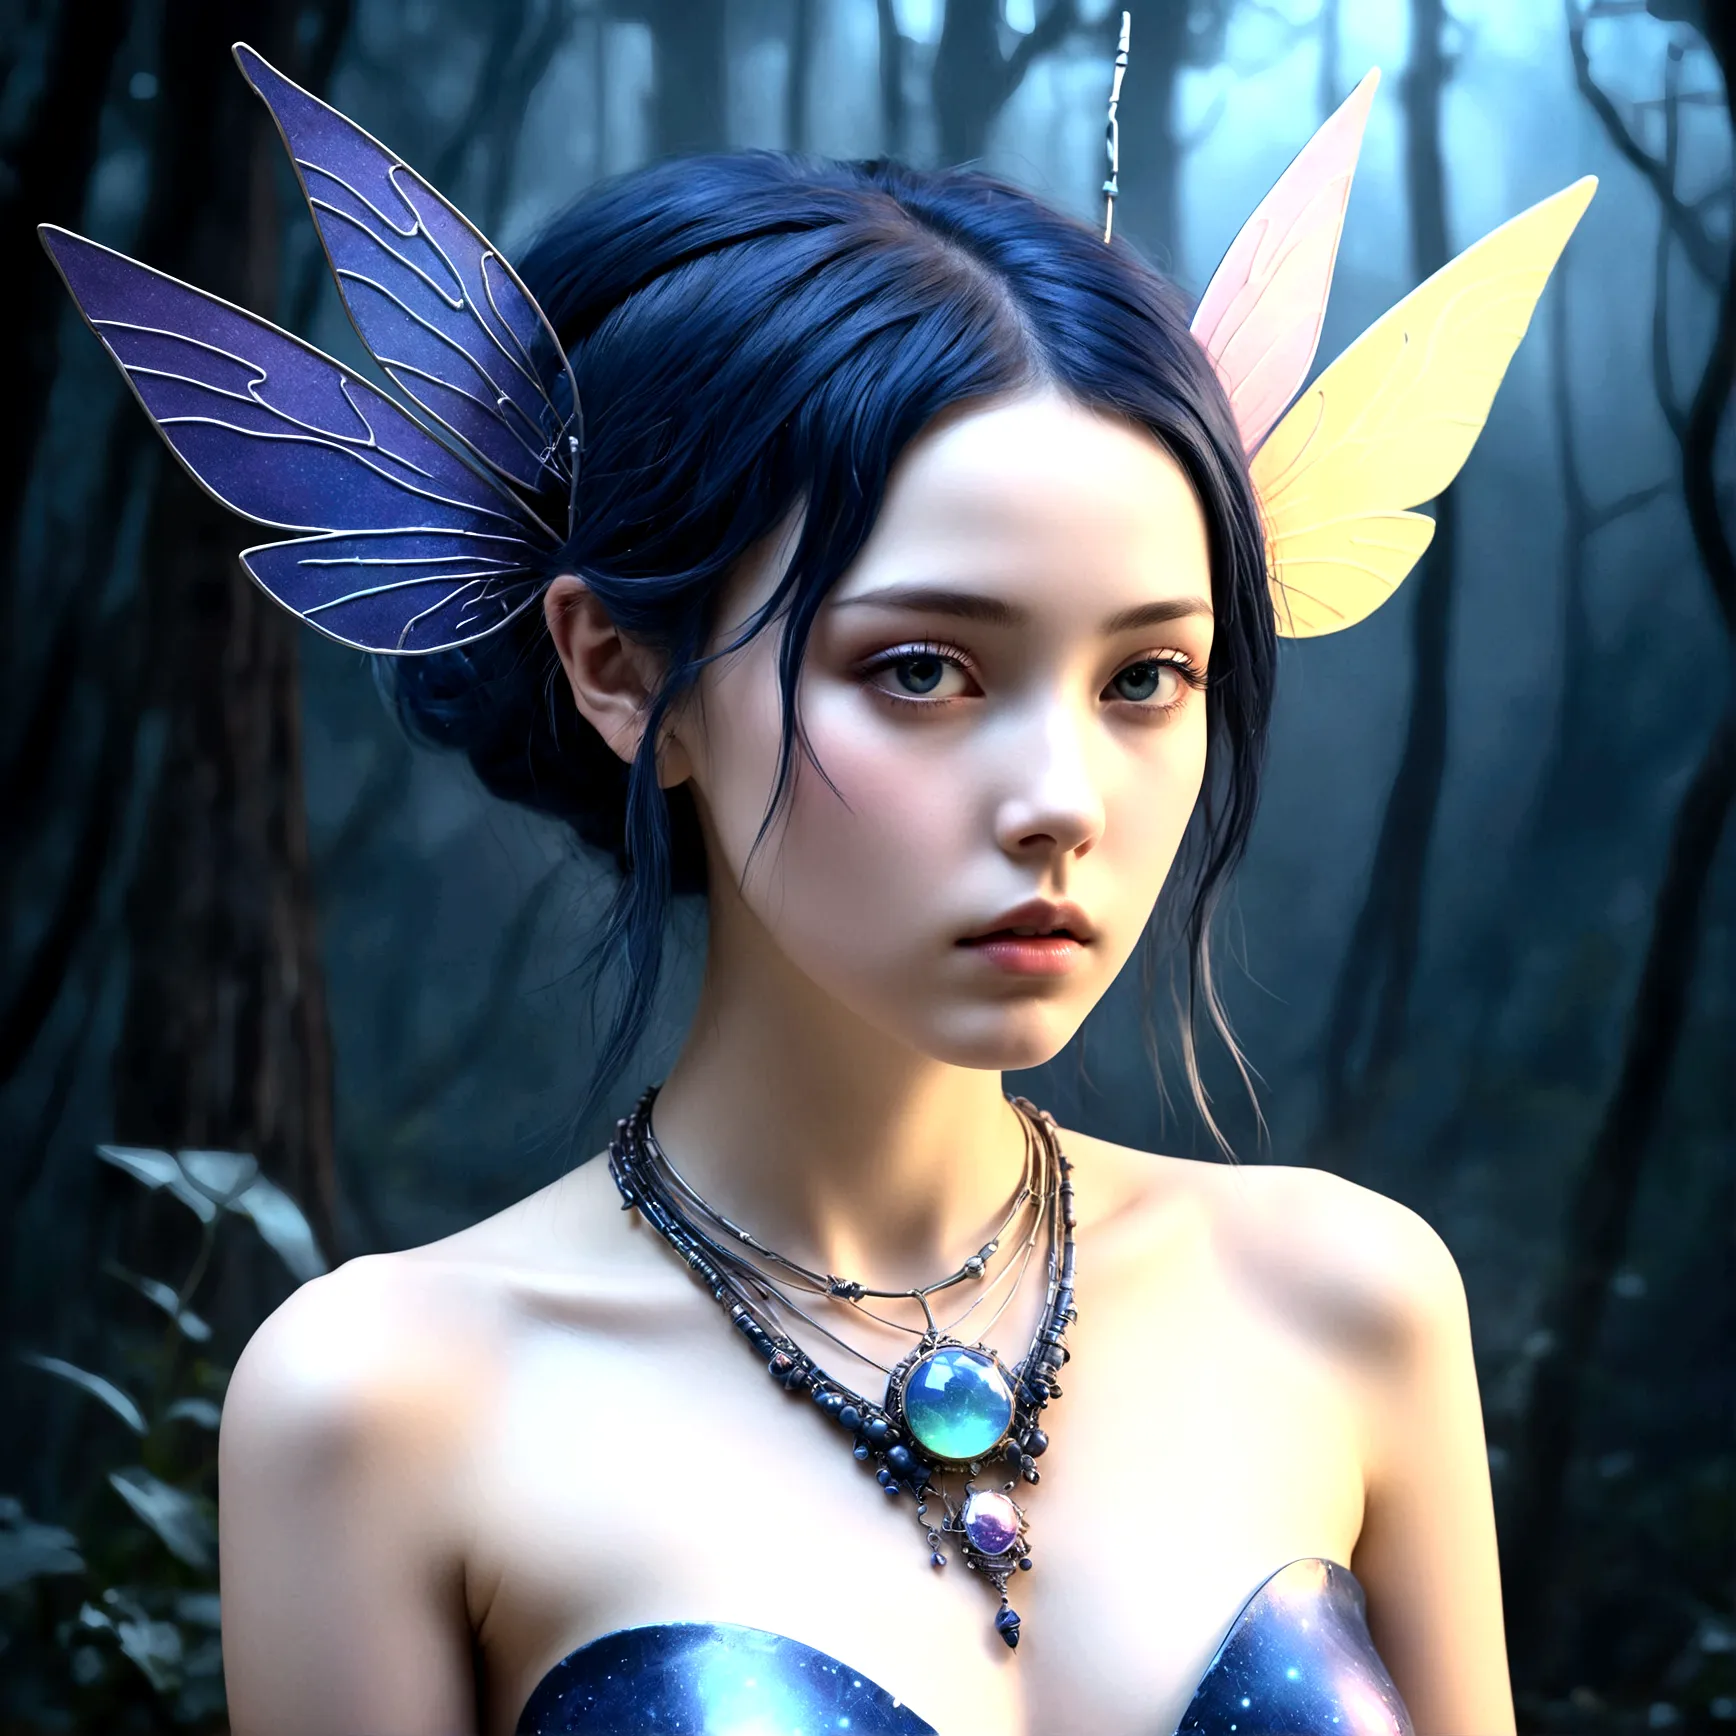 A fascinating digital painting captures the essence of mystical fairies, with porcelain skin and strong spots, which form a stri...